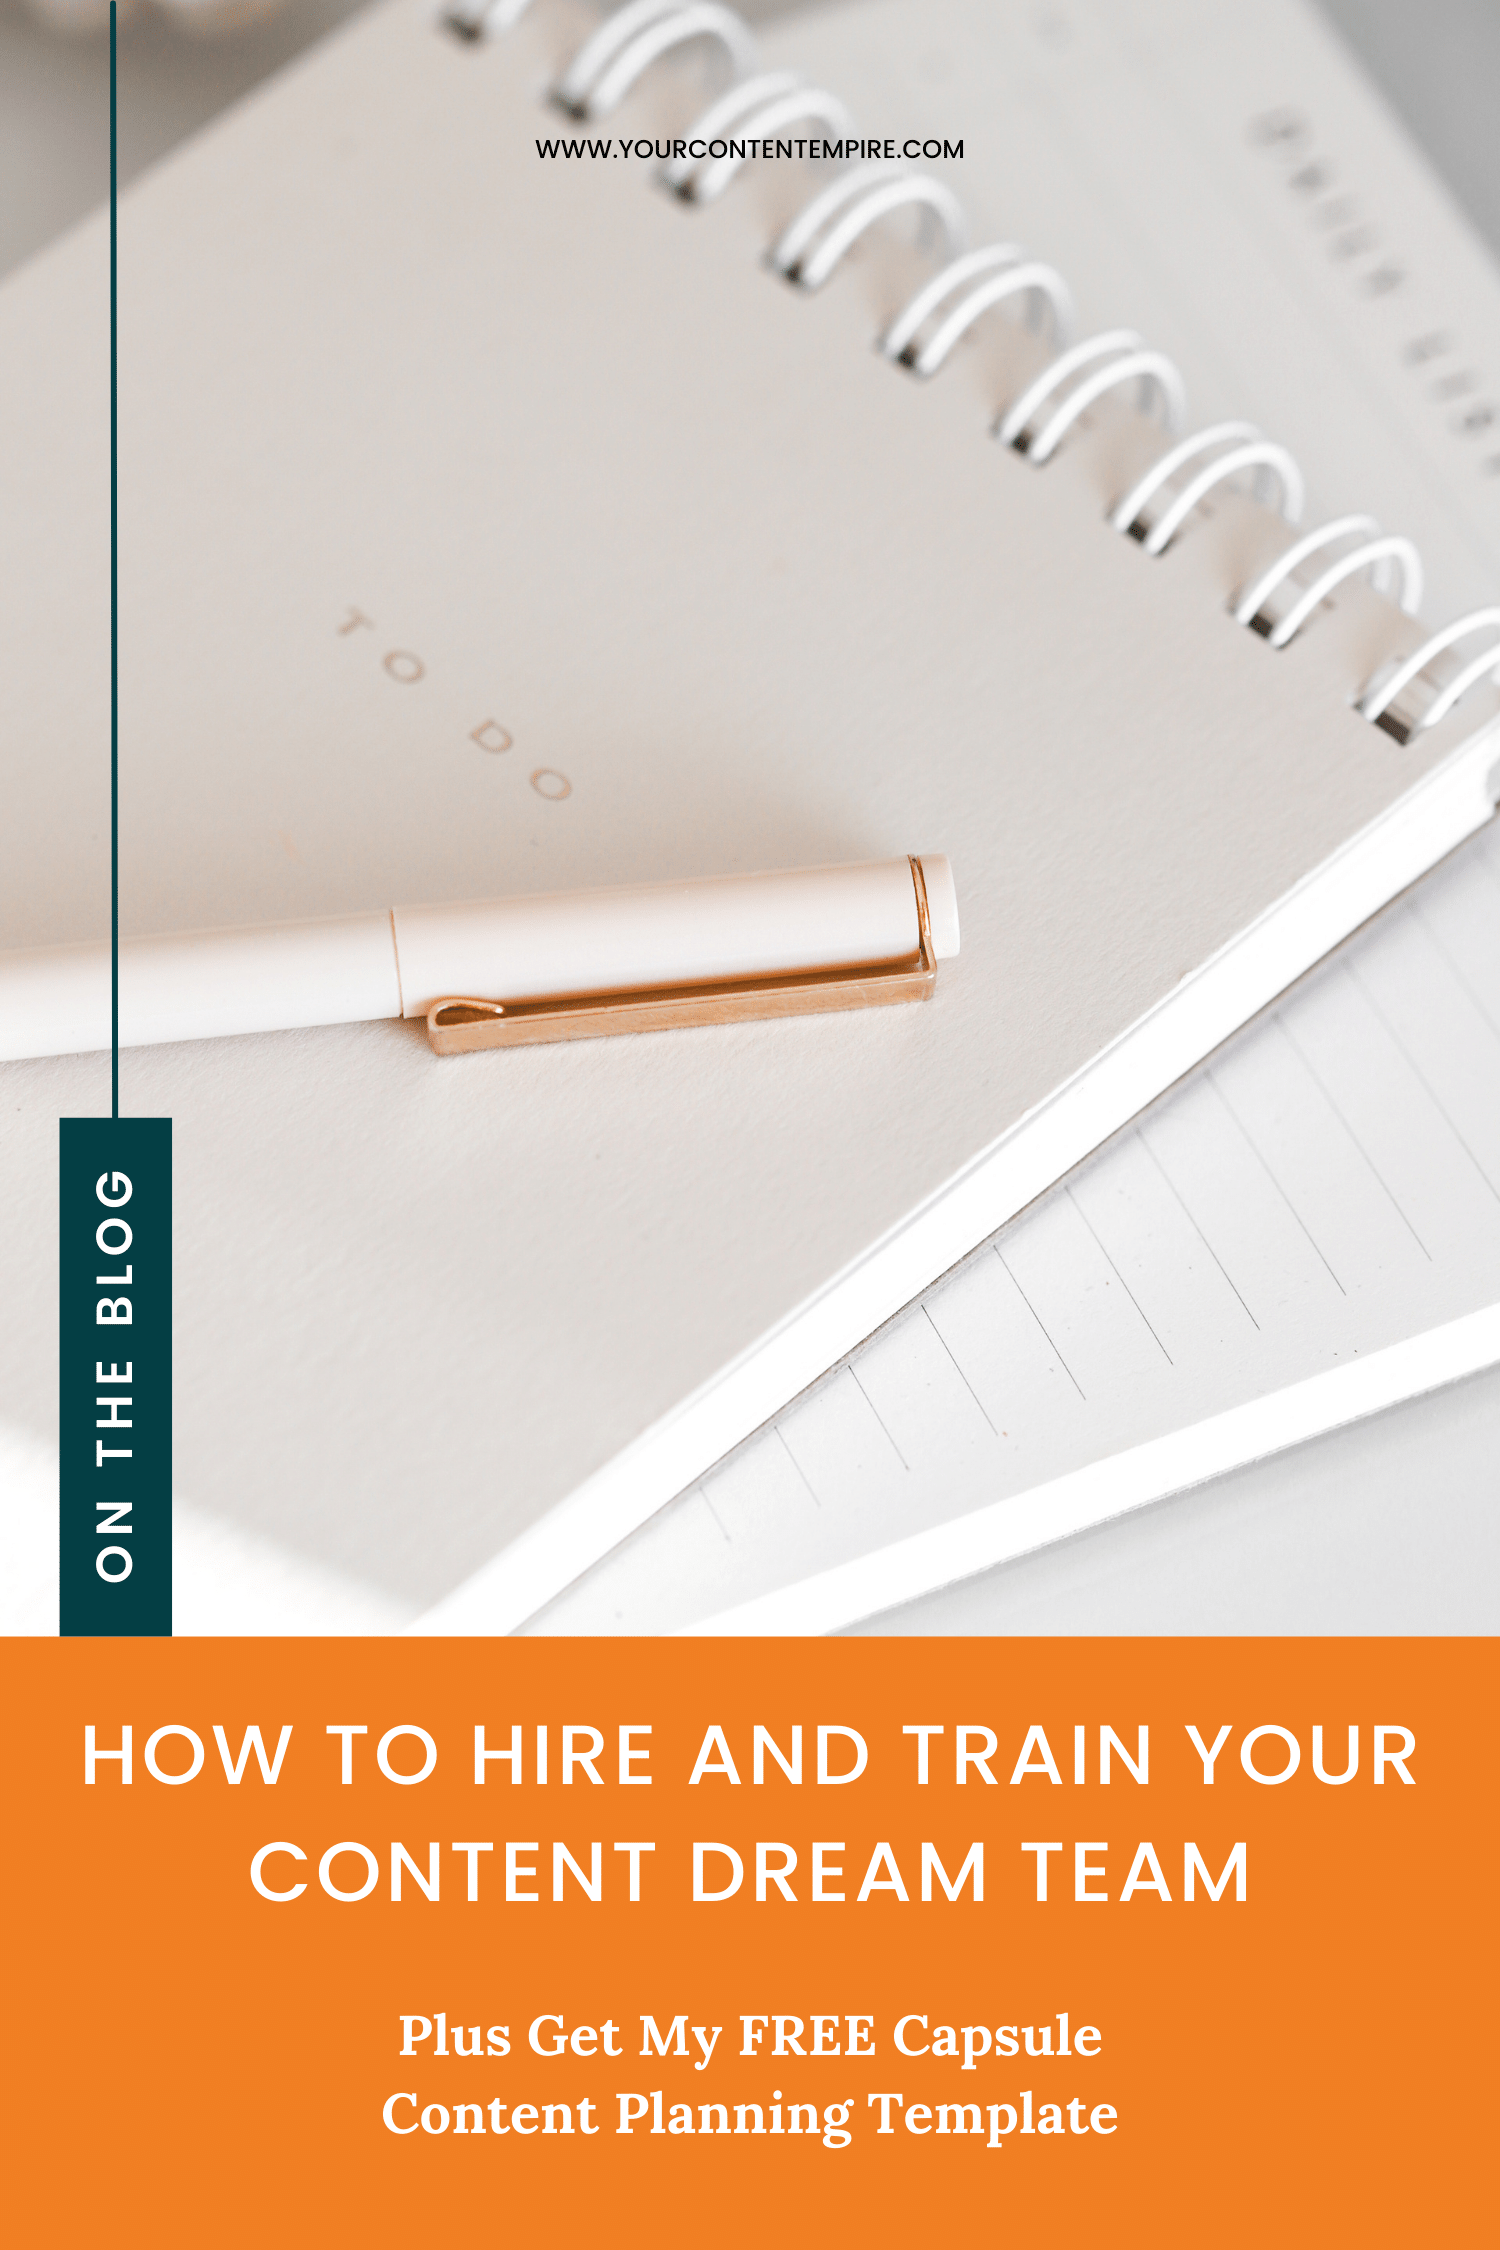 How To Hire And Train Your Content Dream Team